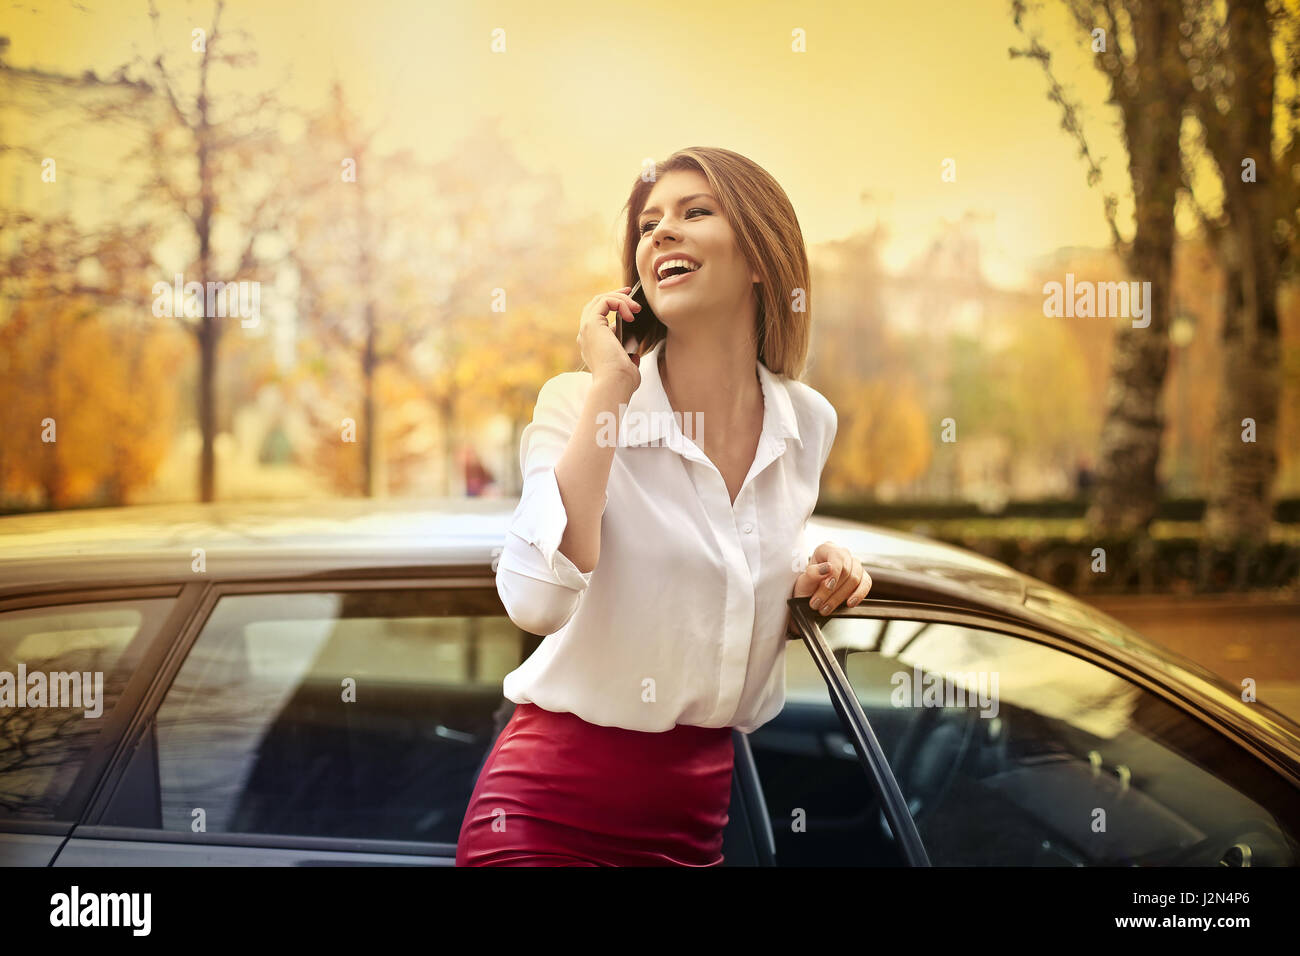 Happy woman telephoning next to car Stock Photo